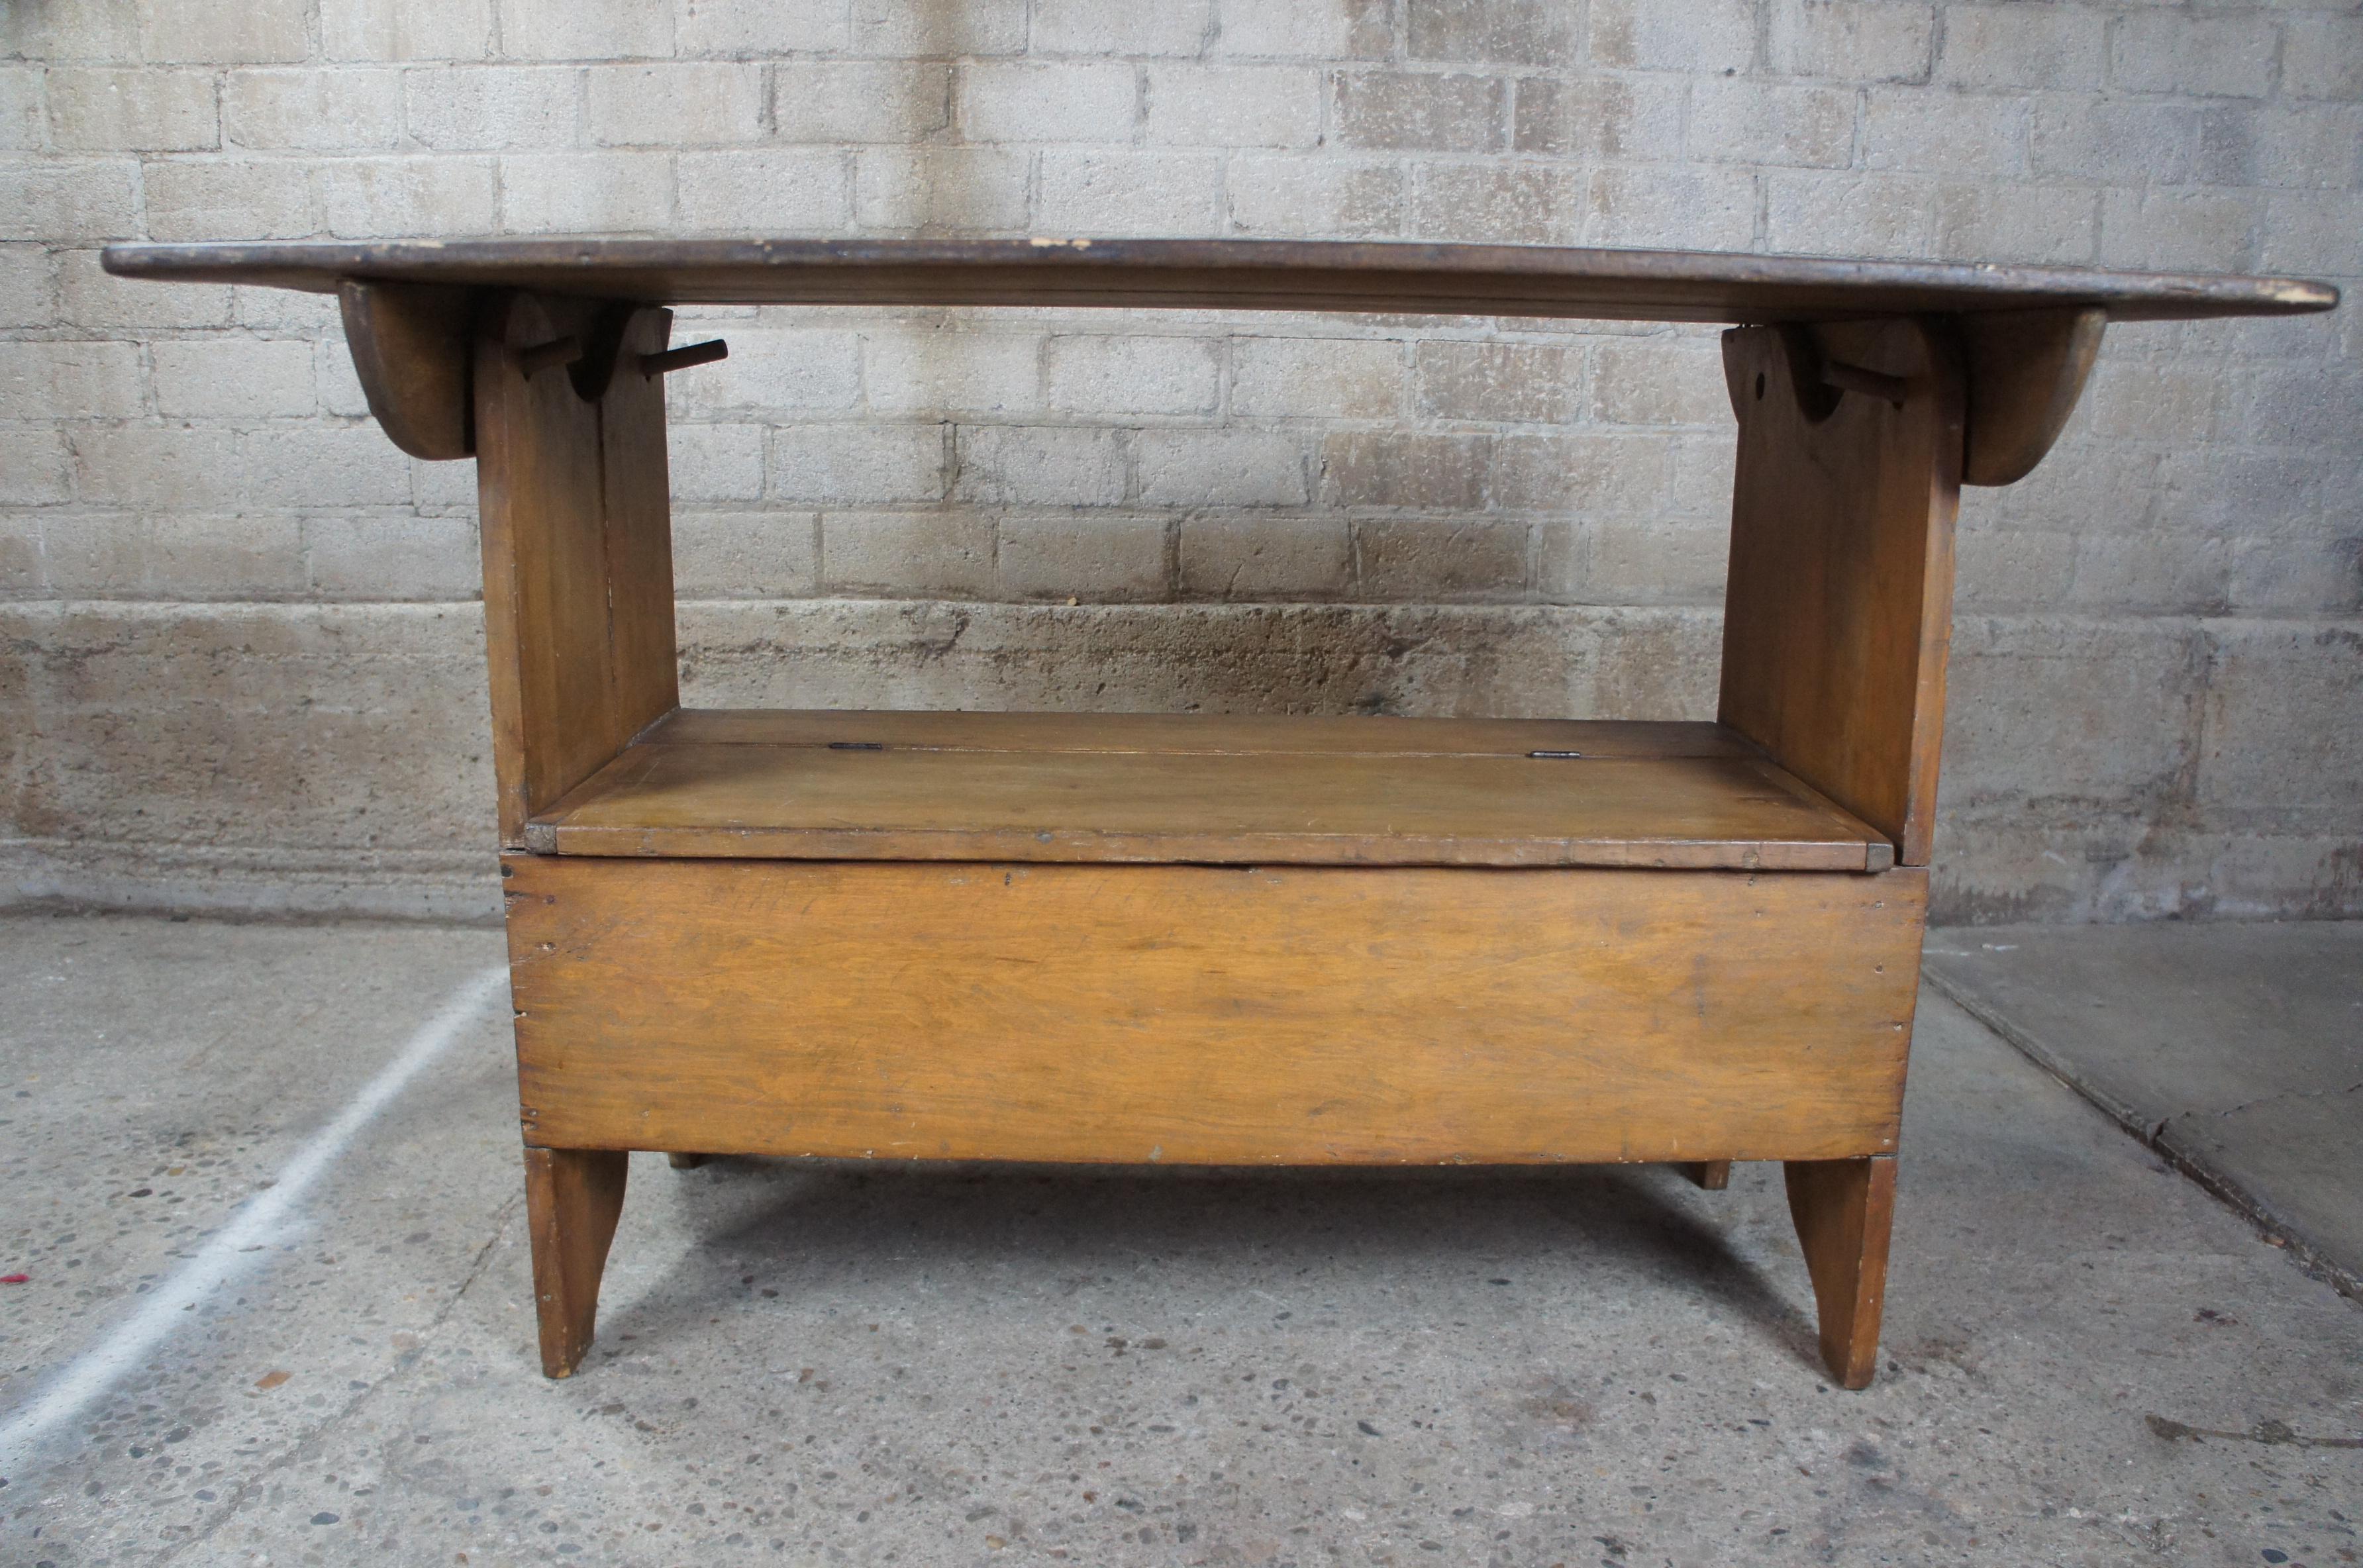 19th Century Primitive Antique Early American Style Rustic Pine Convertable Table Bench Seat